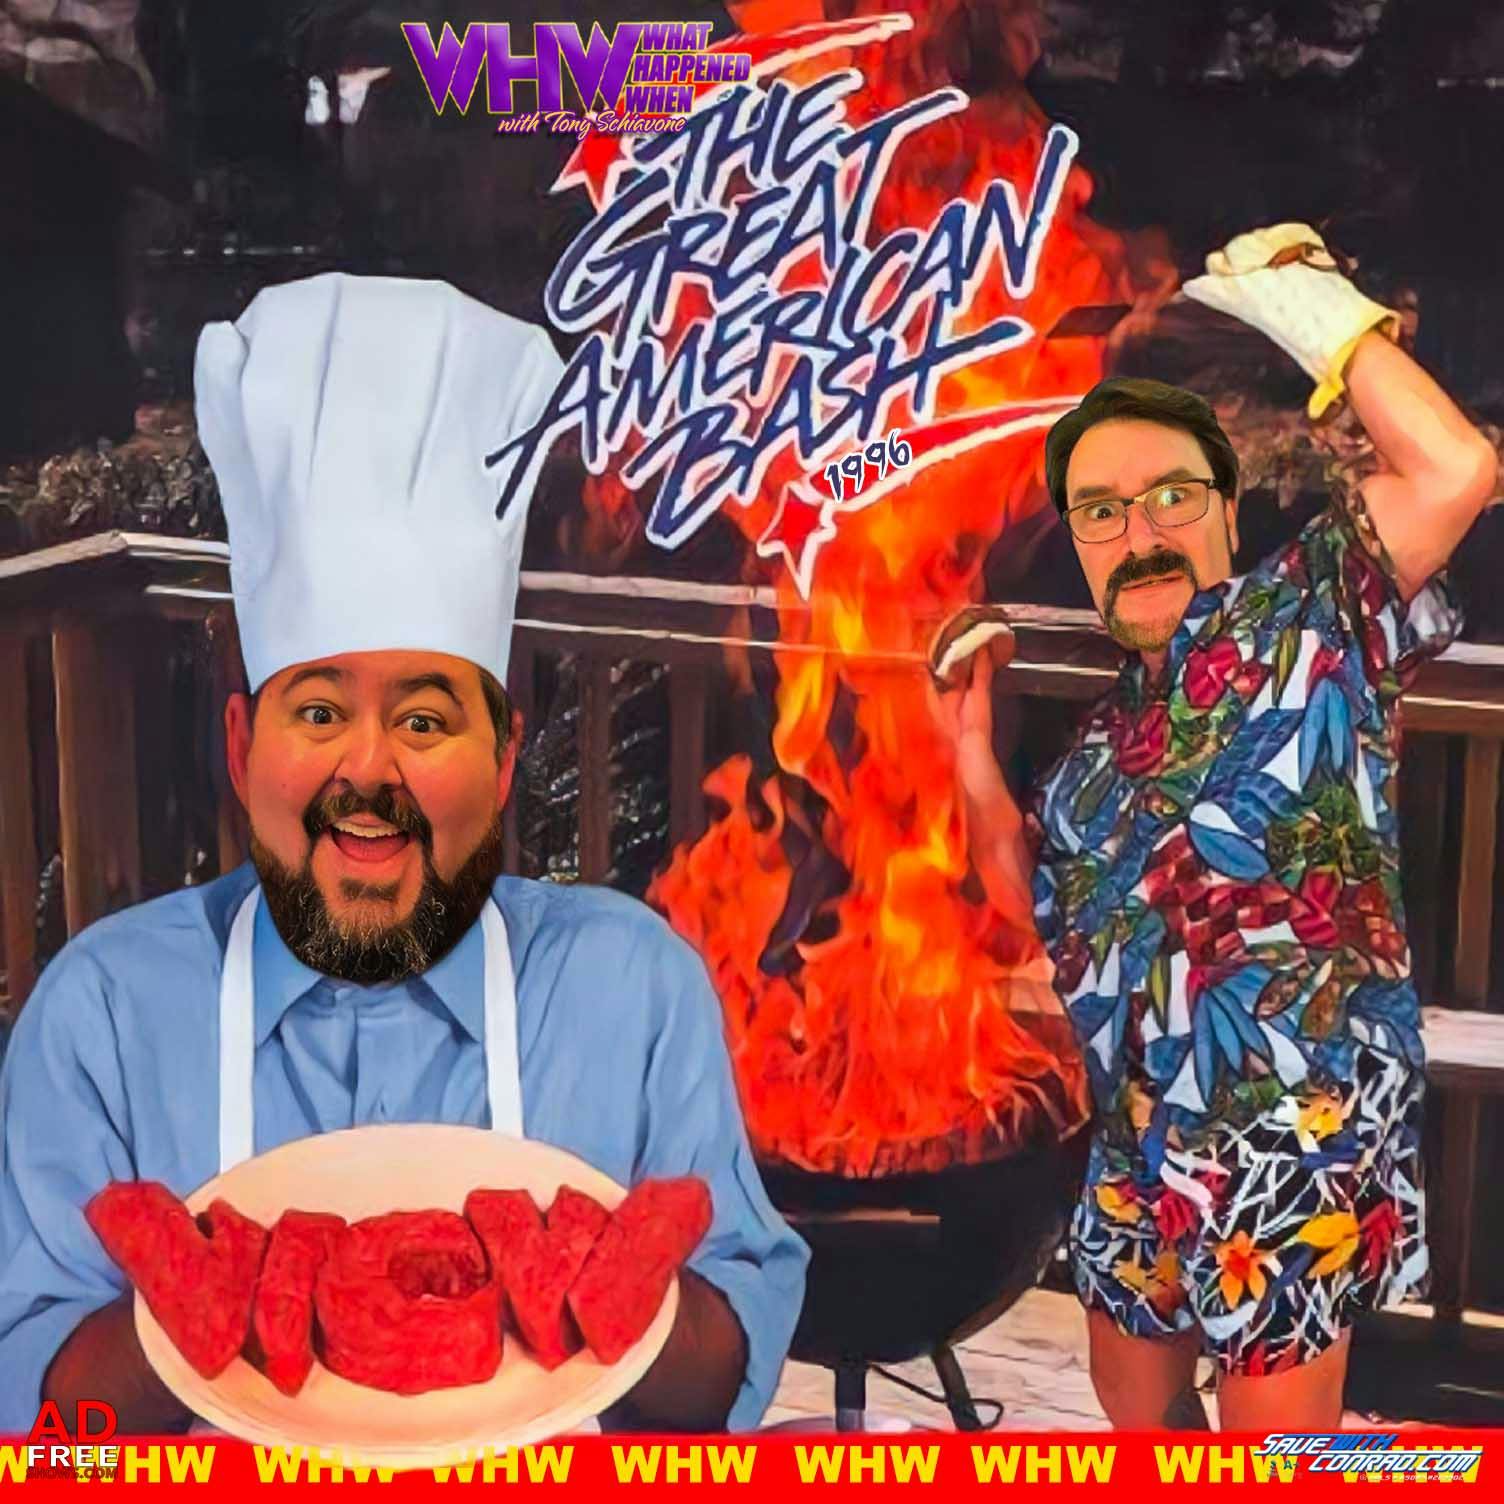 Episode 281:  The Great American Bash 1996